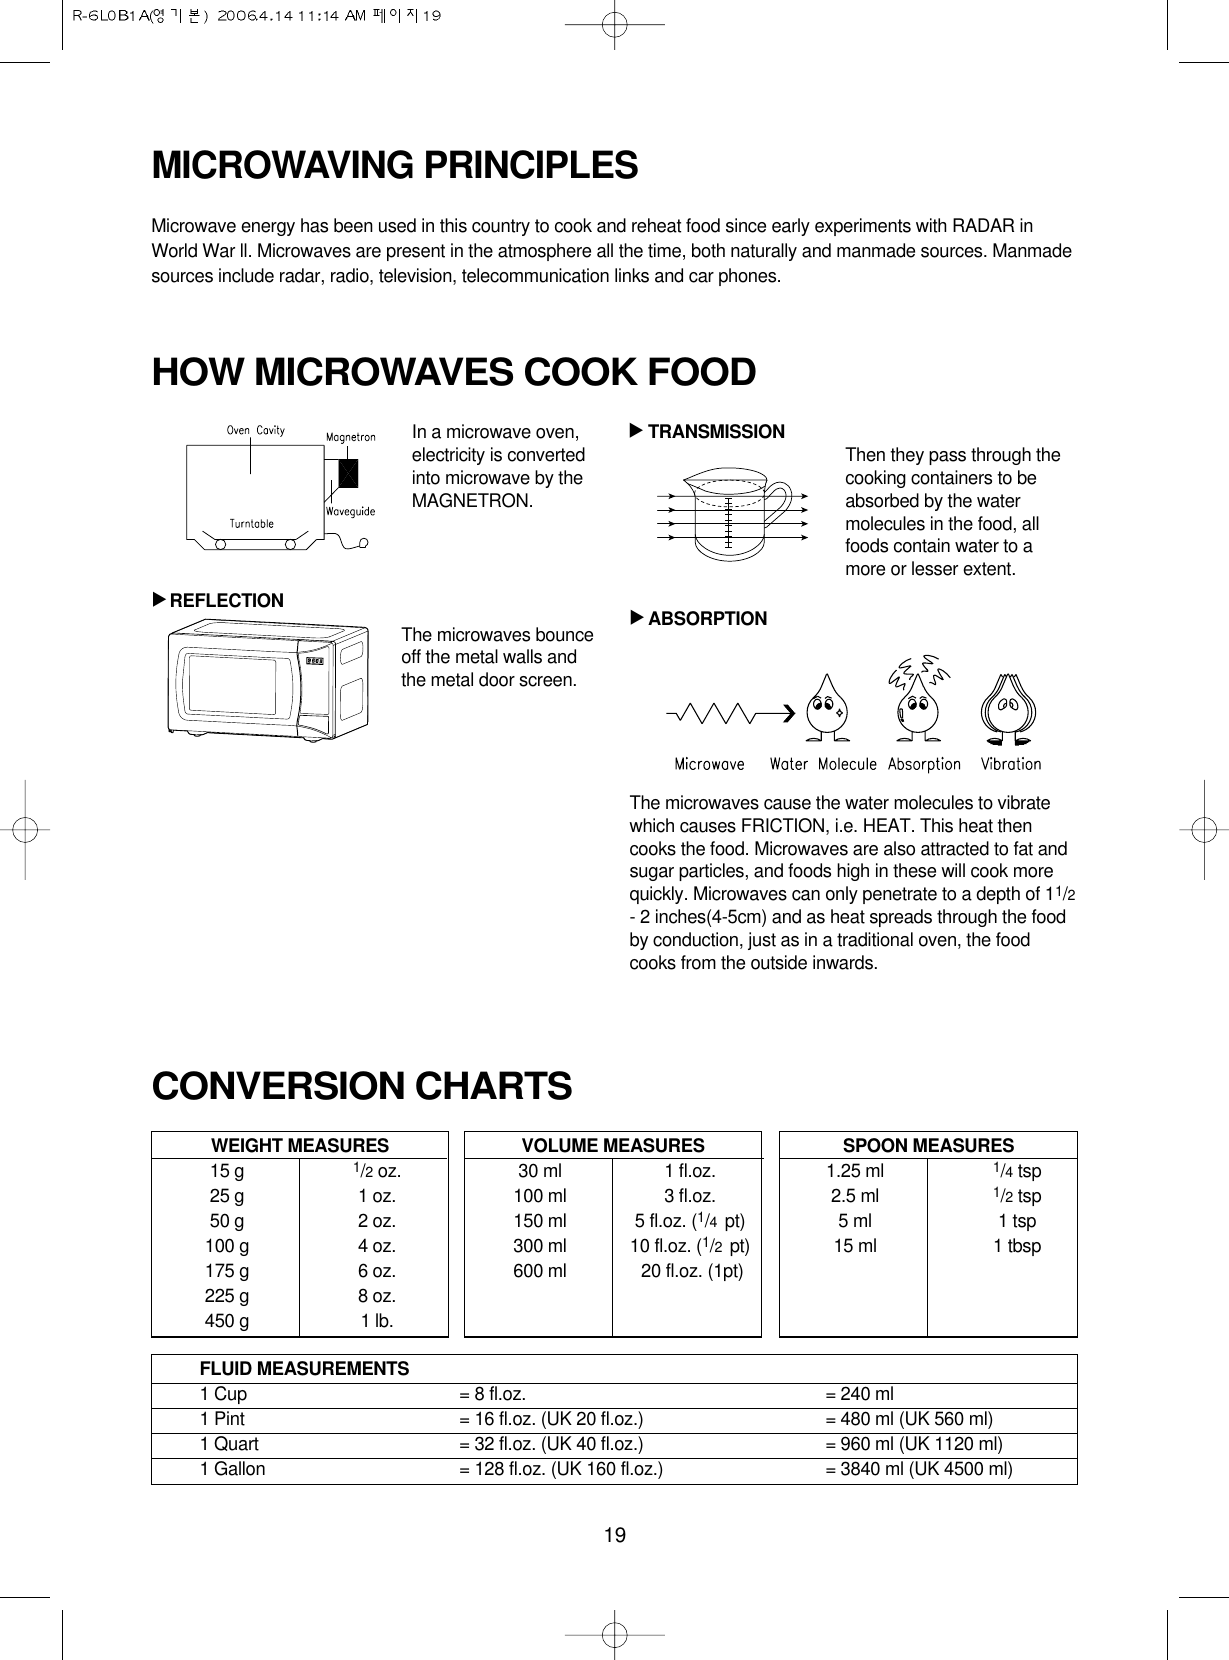 19MICROWAVING PRINCIPLESMicrowave energy has been used in this country to cook and reheat food since early experiments with RADAR inWorld War ll. Microwaves are present in the atmosphere all the time, both naturally and manmade sources. Manmadesources include radar, radio, television, telecommunication links and car phones.CONVERSION CHARTSIn a microwave oven,electricity is convertedinto microwave by theMAGNETRON.REFLECTIONTRANSMISSION Then they pass through thecooking containers to beabsorbed by the watermolecules in the food, allfoods contain water to amore or lesser extent.ABSORPTIONThe microwaves cause the water molecules to vibratewhich causes FRICTION, i.e. HEAT. This heat thencooks the food. Microwaves are also attracted to fat andsugar particles, and foods high in these will cook morequickly. Microwaves can only penetrate to a depth of 11/2- 2 inches(4-5cm) and as heat spreads through the foodby conduction, just as in a traditional oven, the foodcooks from the outside inwards.WEIGHT MEASURES15 g 1/2oz.25 g 1 oz.50 g 2 oz.100 g 4 oz.175 g 6 oz.225 g 8 oz.450 g 1 lb.HOW MICROWAVES COOK FOOD▲▲▲VOLUME MEASURES30 ml 1 fl.oz.100 ml 3 fl.oz.150 ml 5 fl.oz. (1/4  pt)300 ml 10 fl.oz. (1/2  pt)600 ml 20 fl.oz. (1pt)SPOON MEASURES1.25 ml 1/4tsp2.5 ml 1/2tsp5 ml 1 tsp15 ml 1 tbspFLUID MEASUREMENTS1 Cup = 8 fl.oz. = 240 ml1 Pint = 16 fl.oz. (UK 20 fl.oz.) = 480 ml (UK 560 ml)1 Quart = 32 fl.oz. (UK 40 fl.oz.) = 960 ml (UK 1120 ml)1 Gallon = 128 fl.oz. (UK 160 fl.oz.) = 3840 ml (UK 4500 ml)The microwaves bounceoff the metal walls andthe metal door screen.